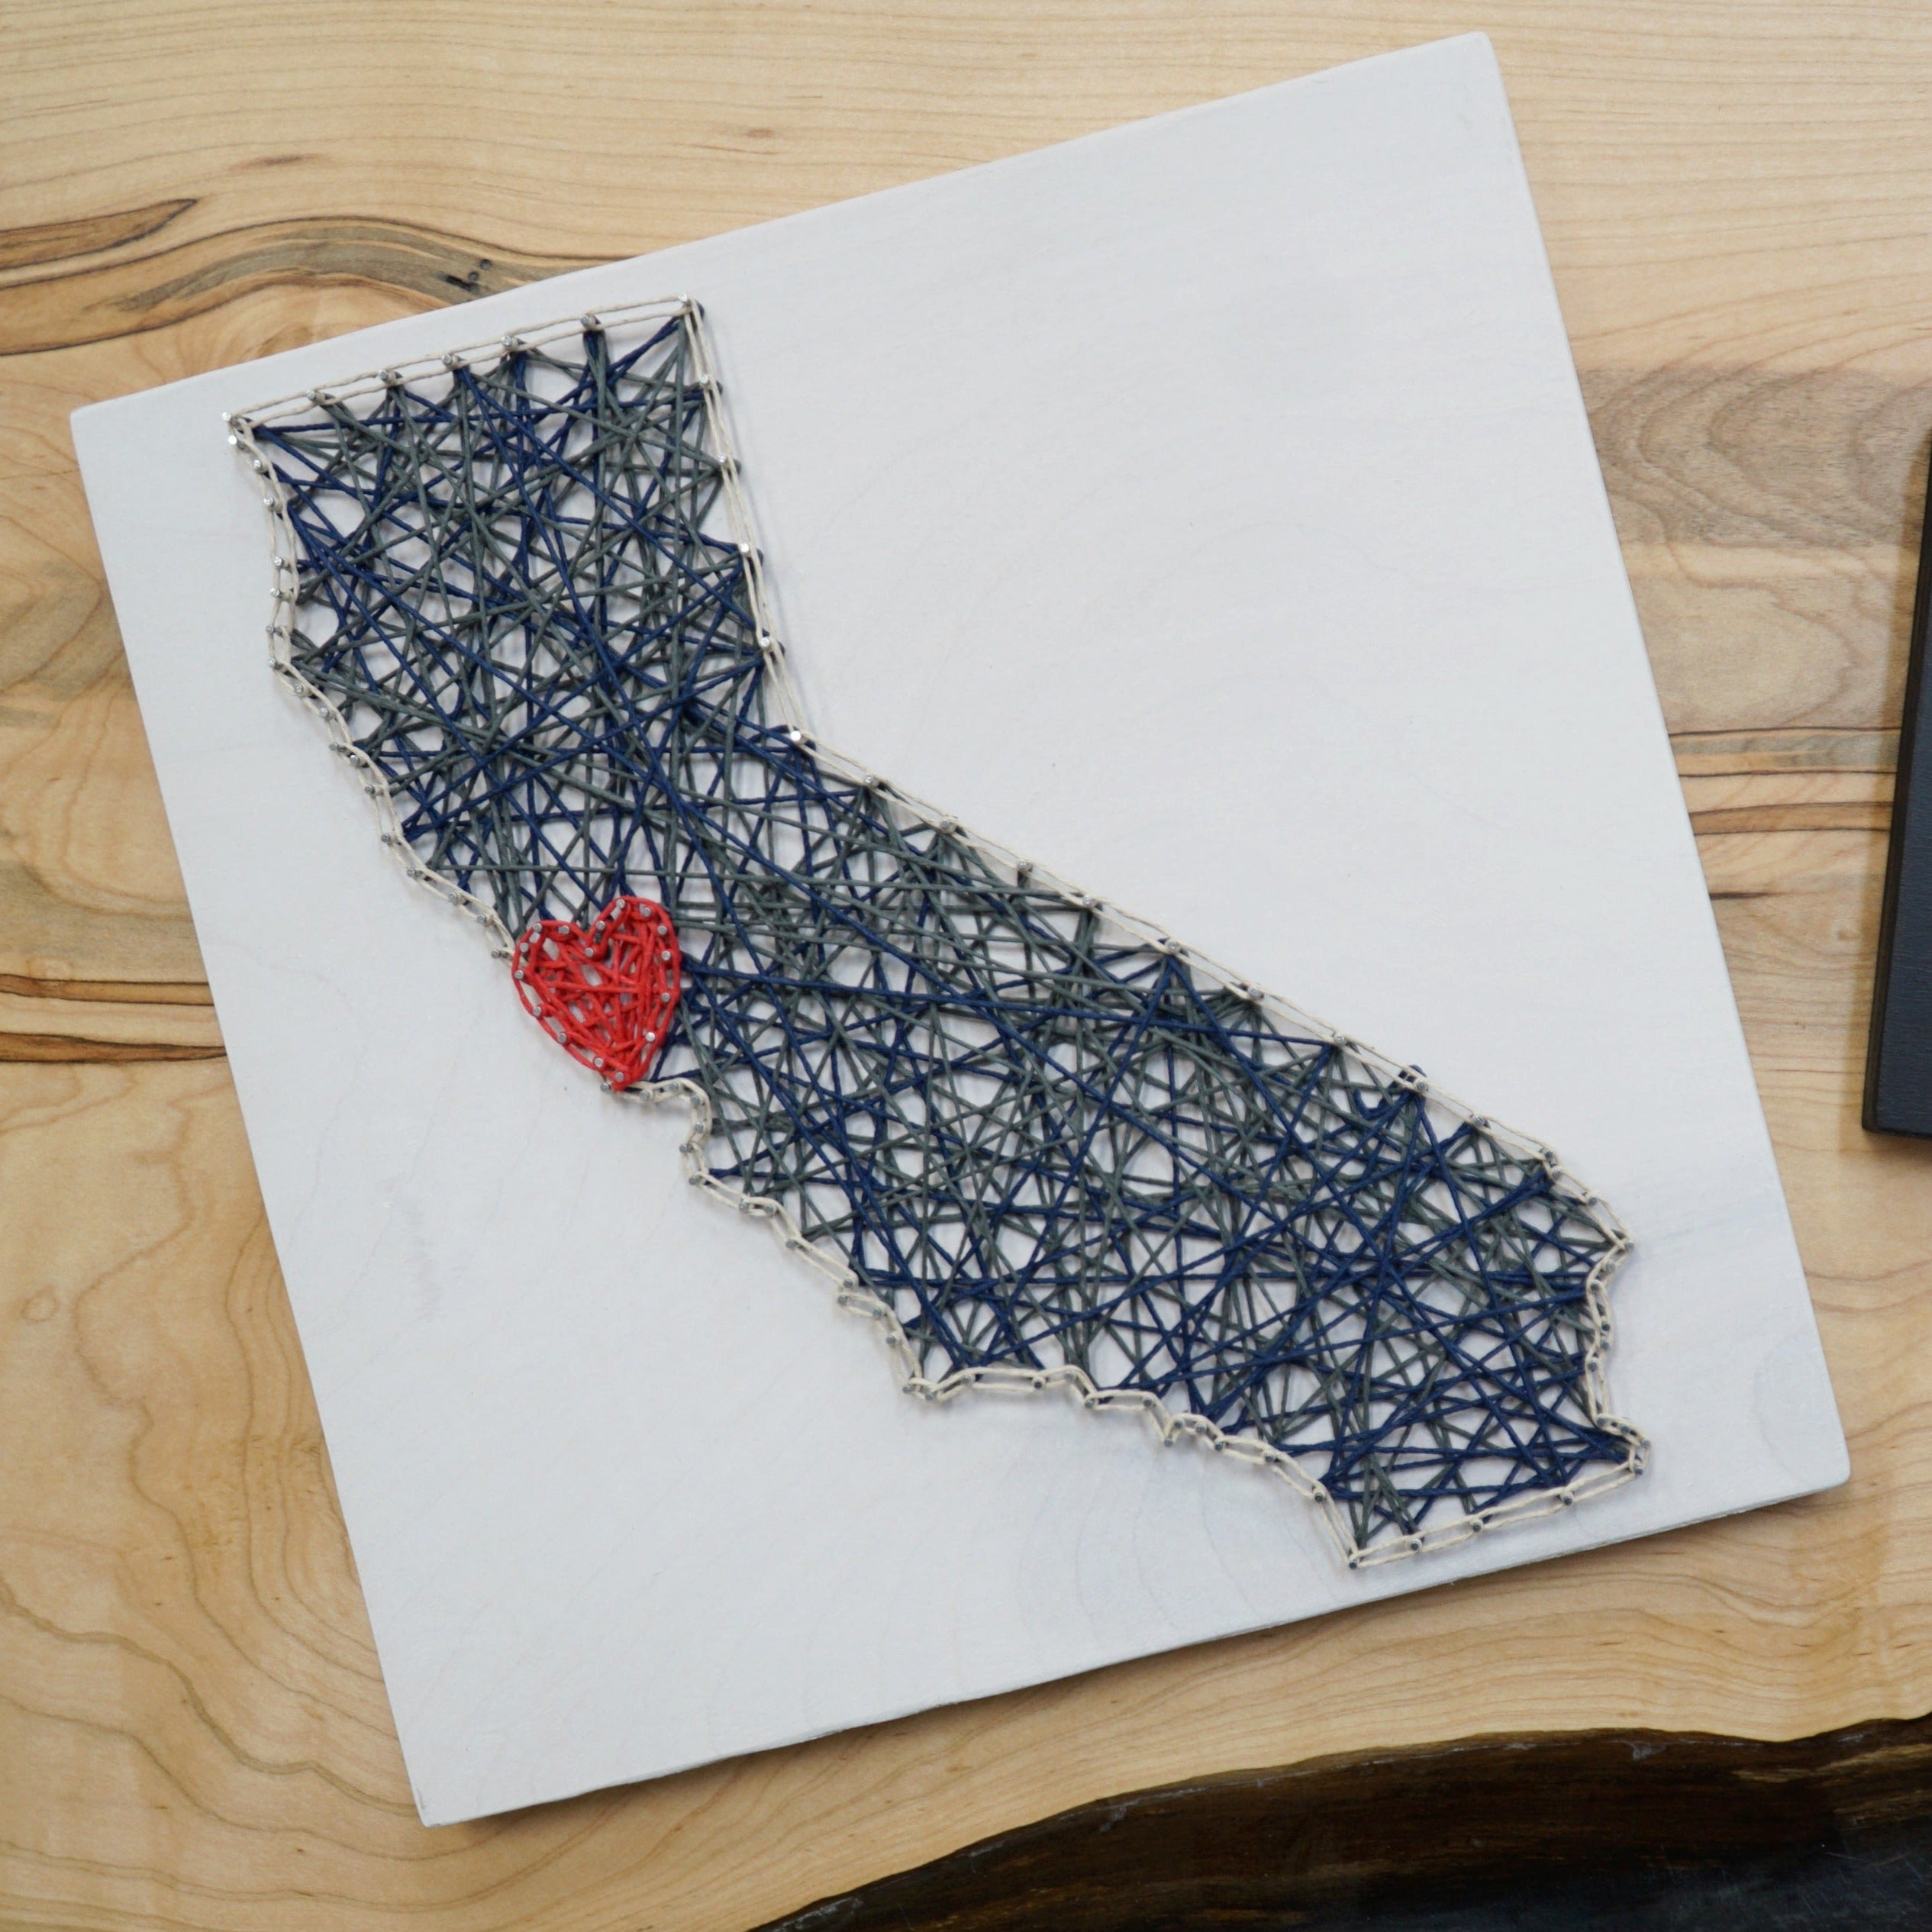 California Art with Heart 12x12 in